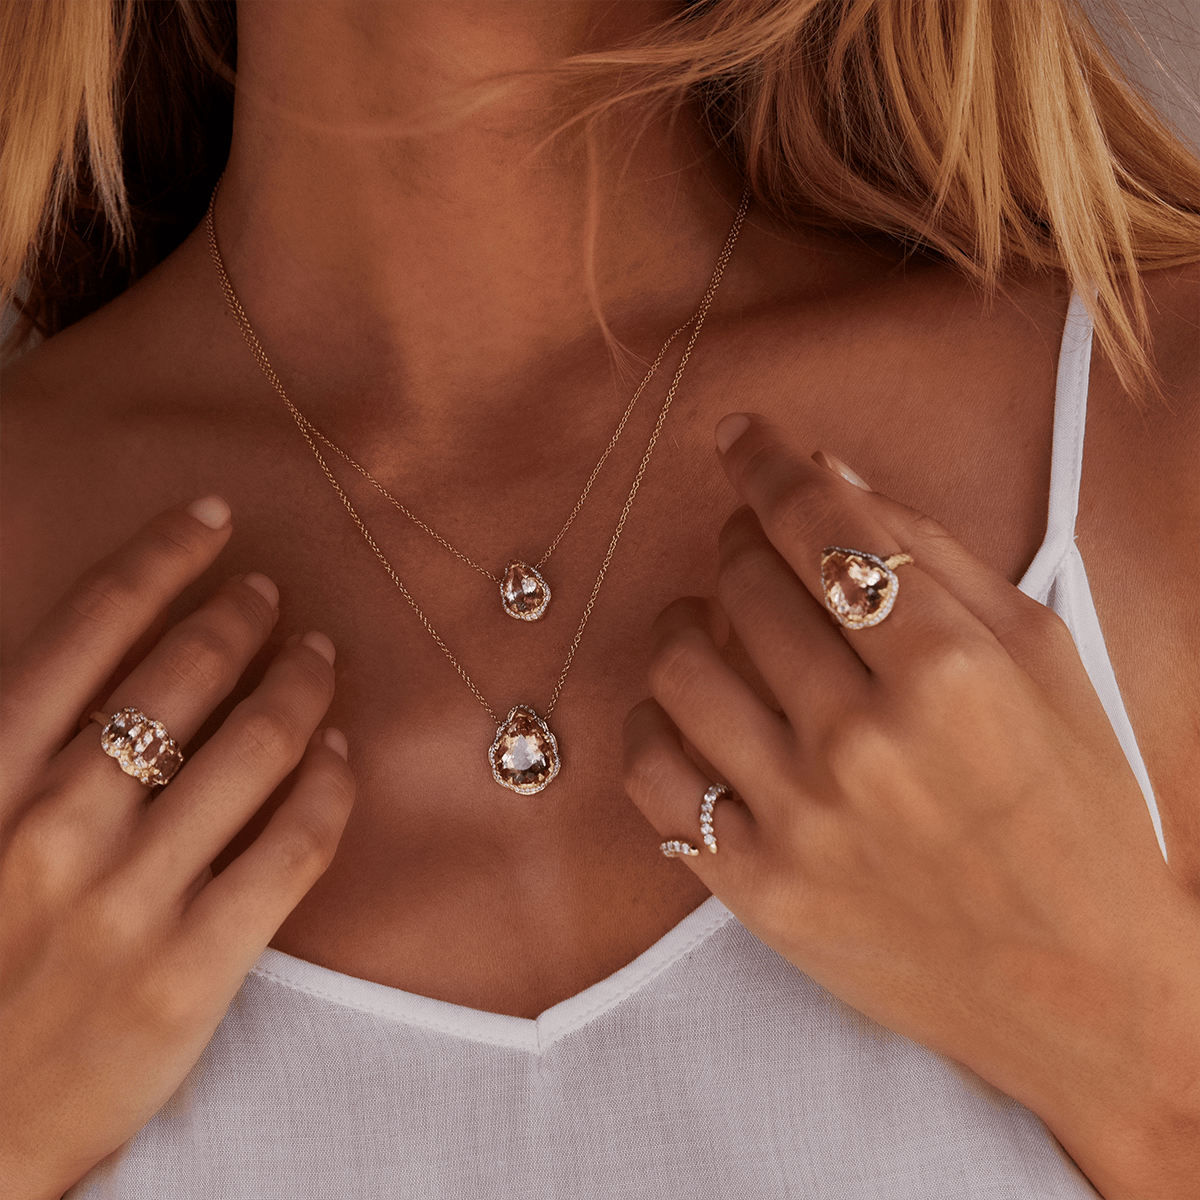 Best Single Diamond Necklaces | With Clarity